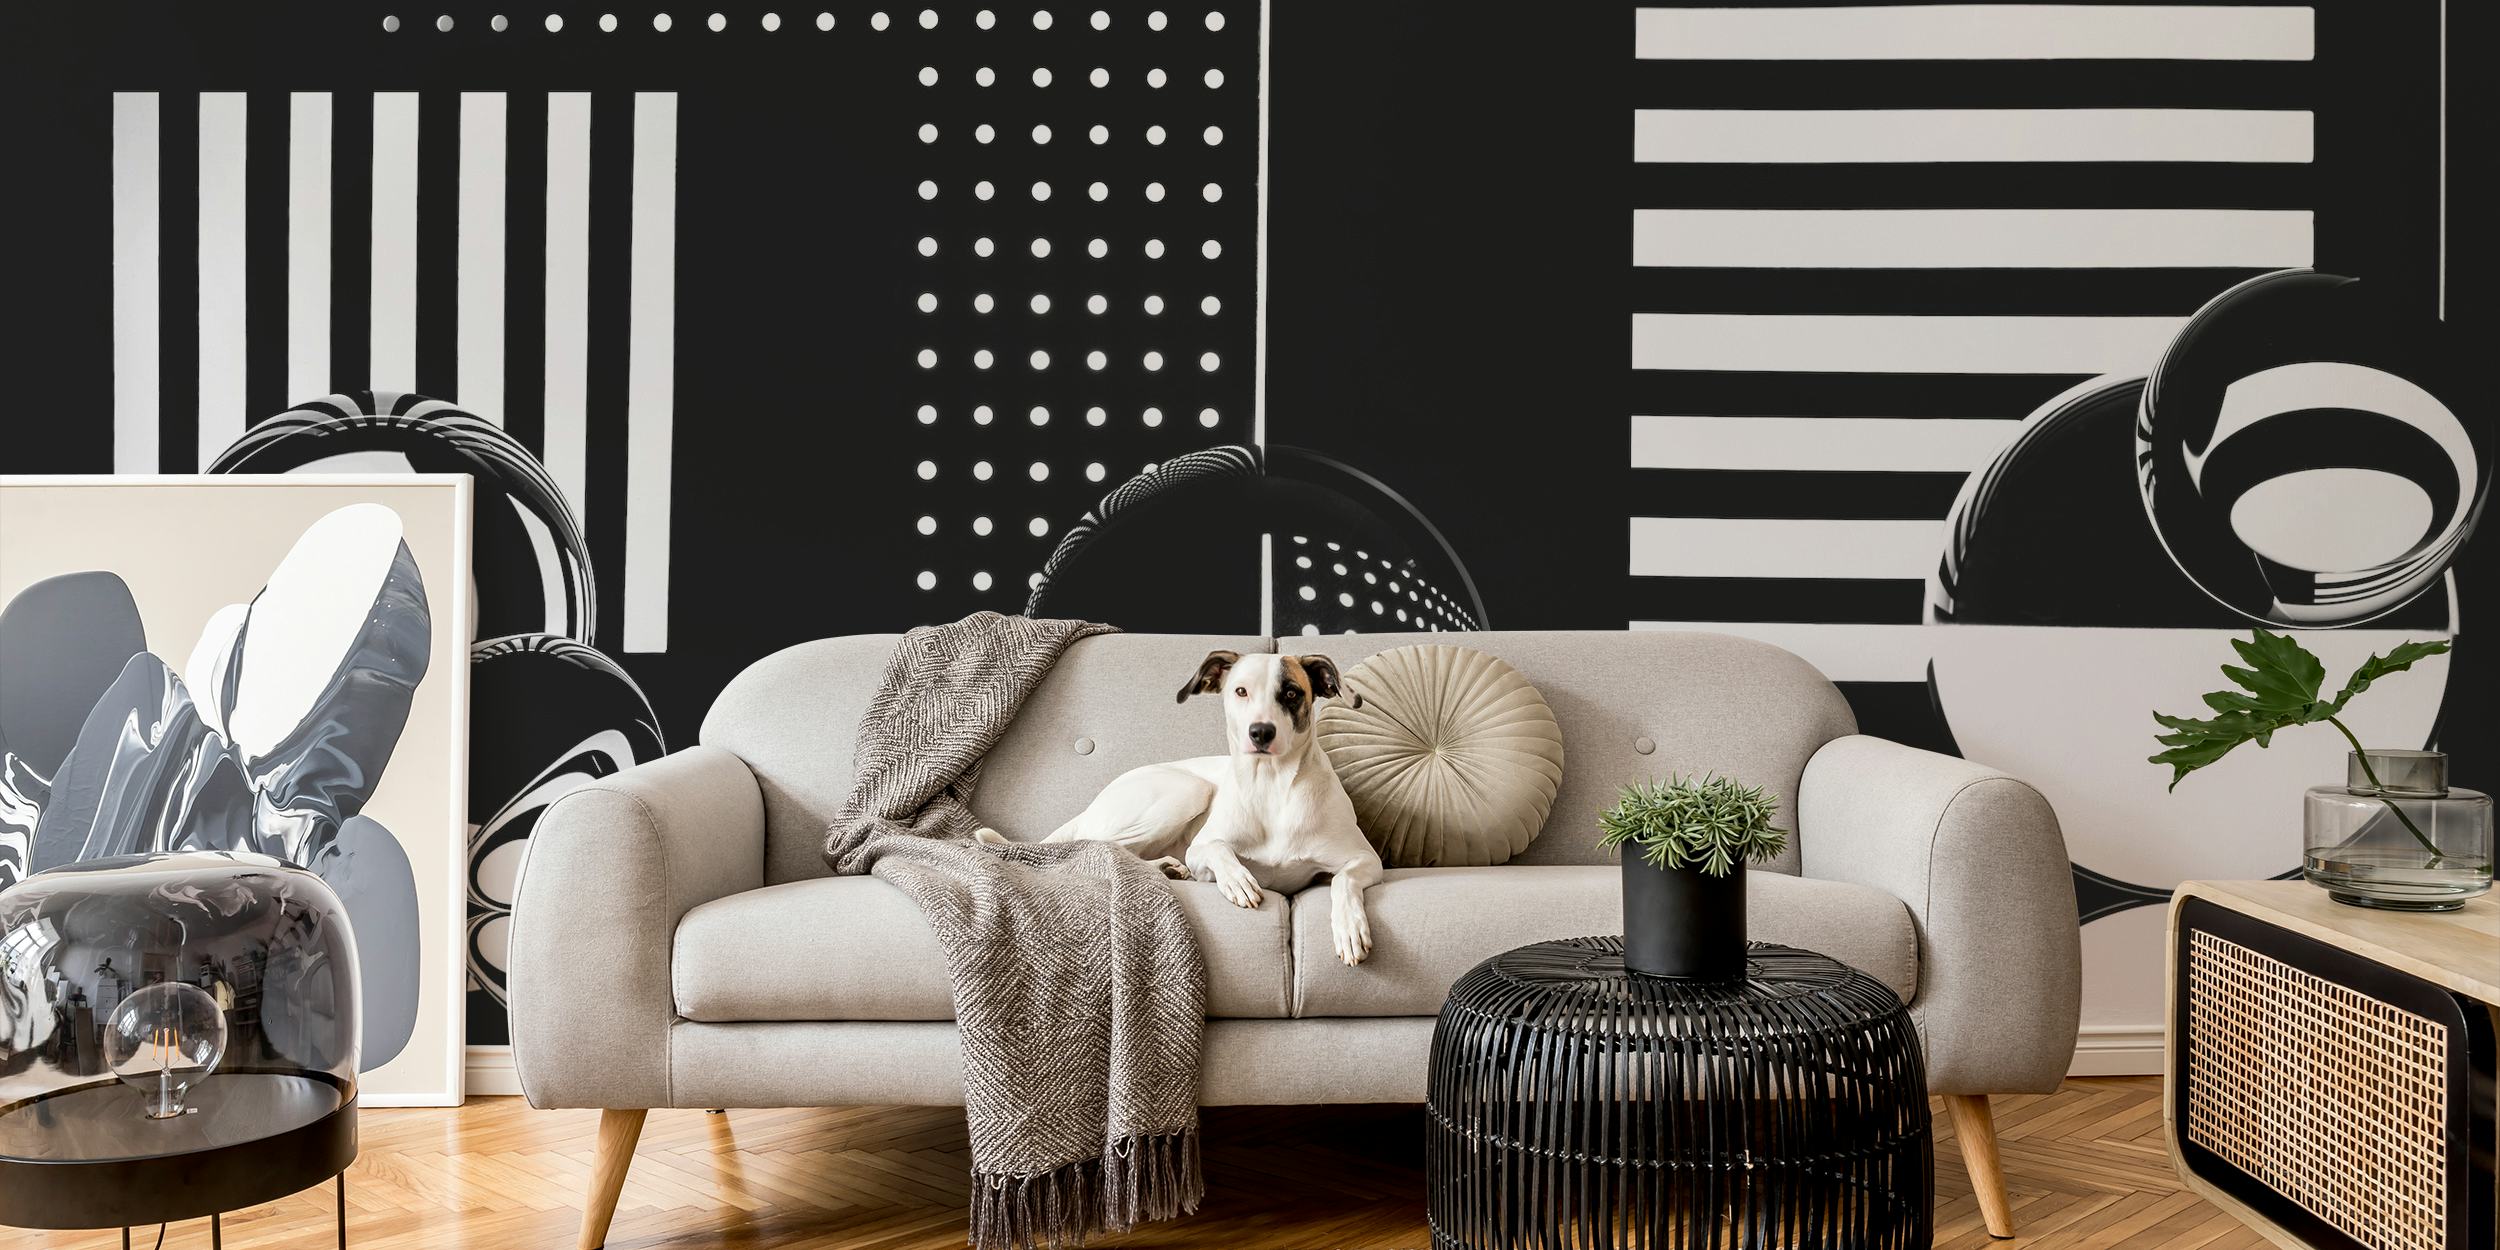 Abstract black and white wall mural with geometric shapes